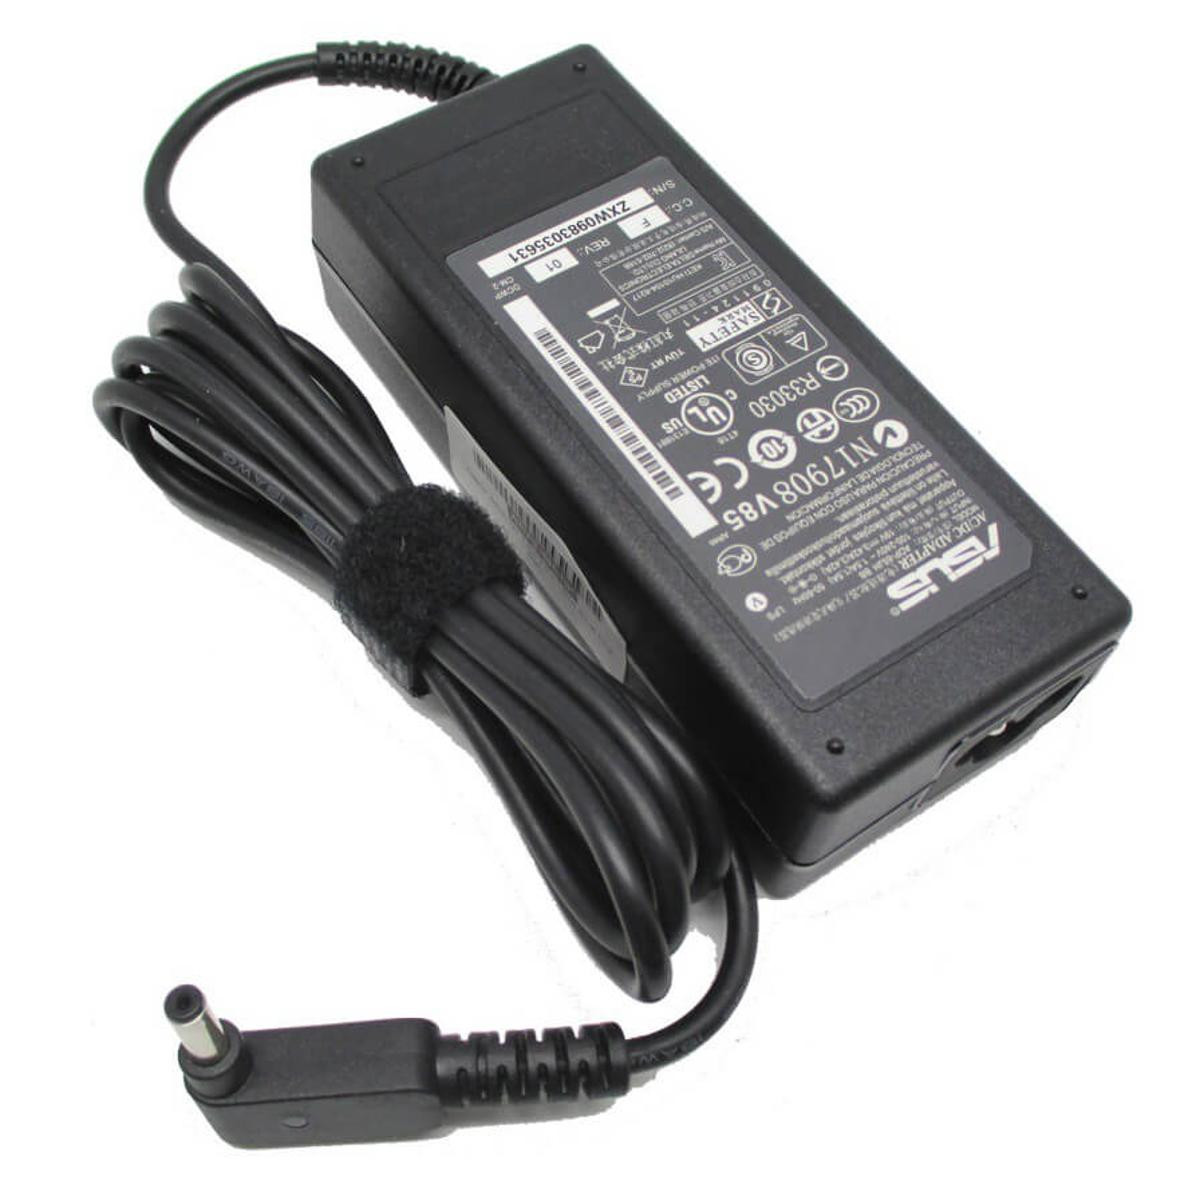 Asus Laptop charger Adapter For Asus 19V 3.42A ( 65W ) 5.5*2.5 mm for ASUS K42 K52 K52F K53E X452E F552L Power Supply Charger